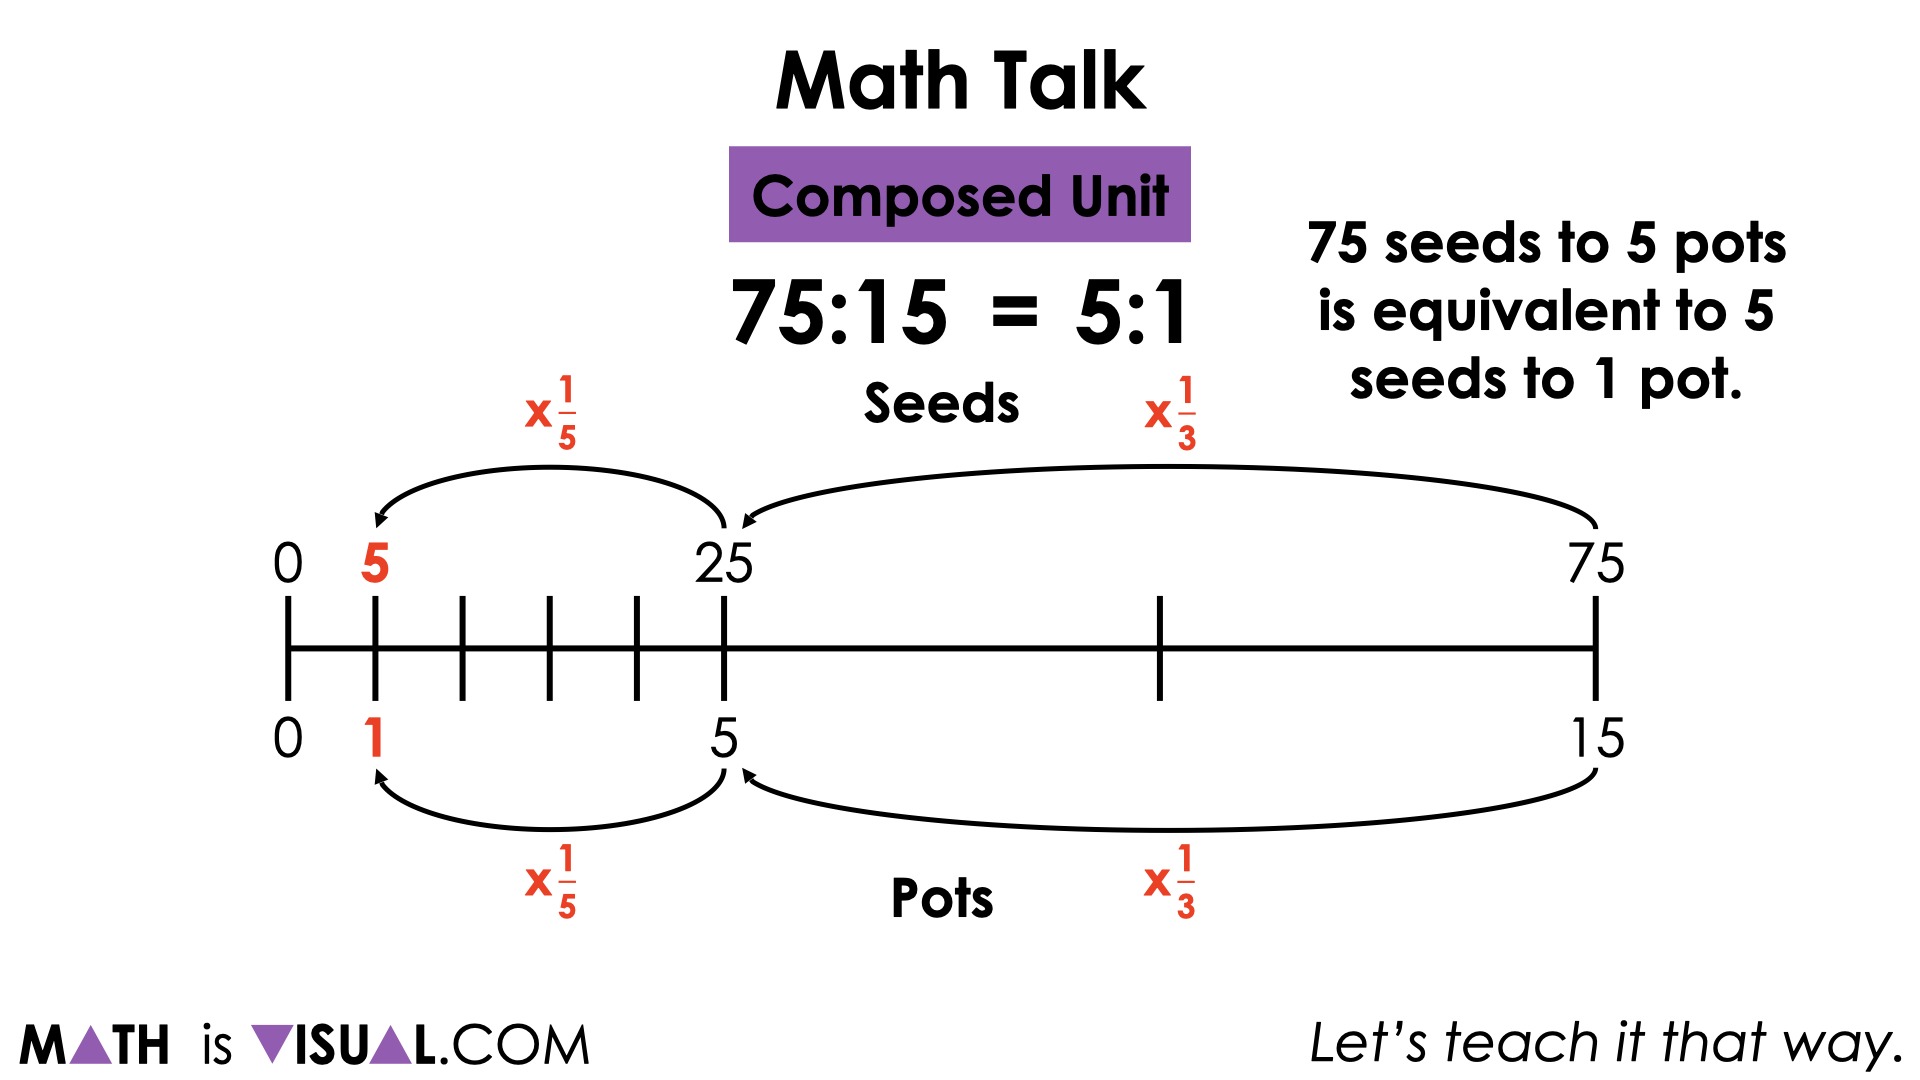 planting-flowers-day-5-composed-unit-01-math-talk-ratio-75-to